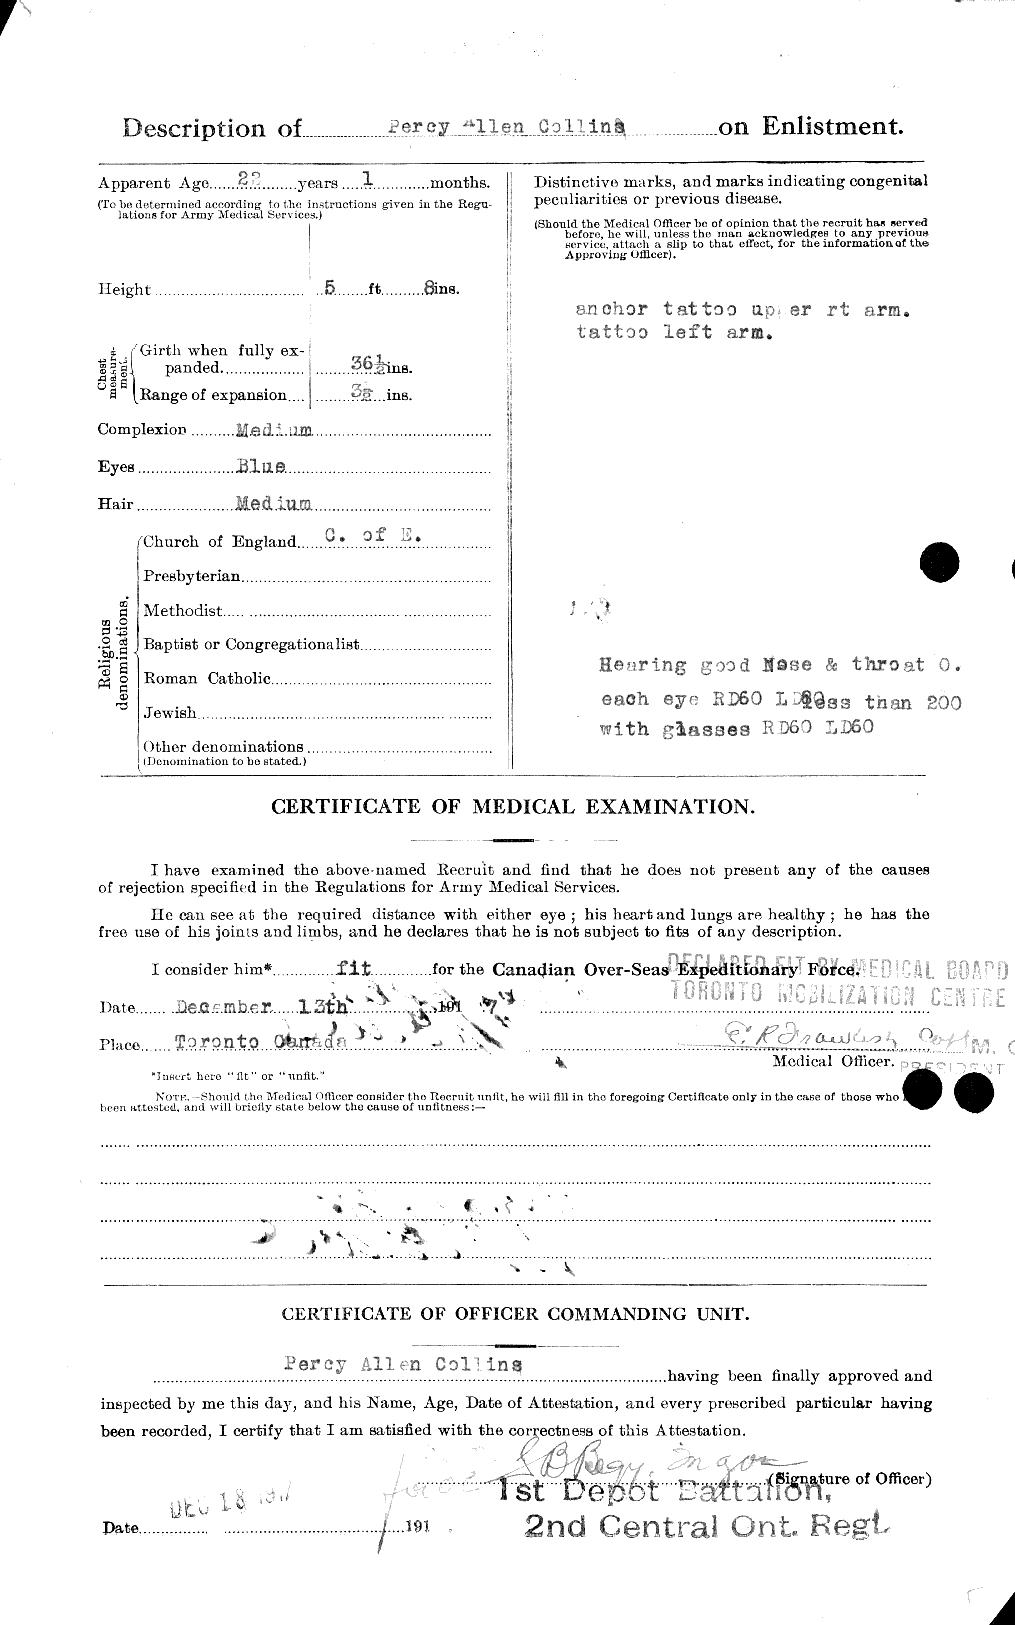 Personnel Records of the First World War - CEF 034490b